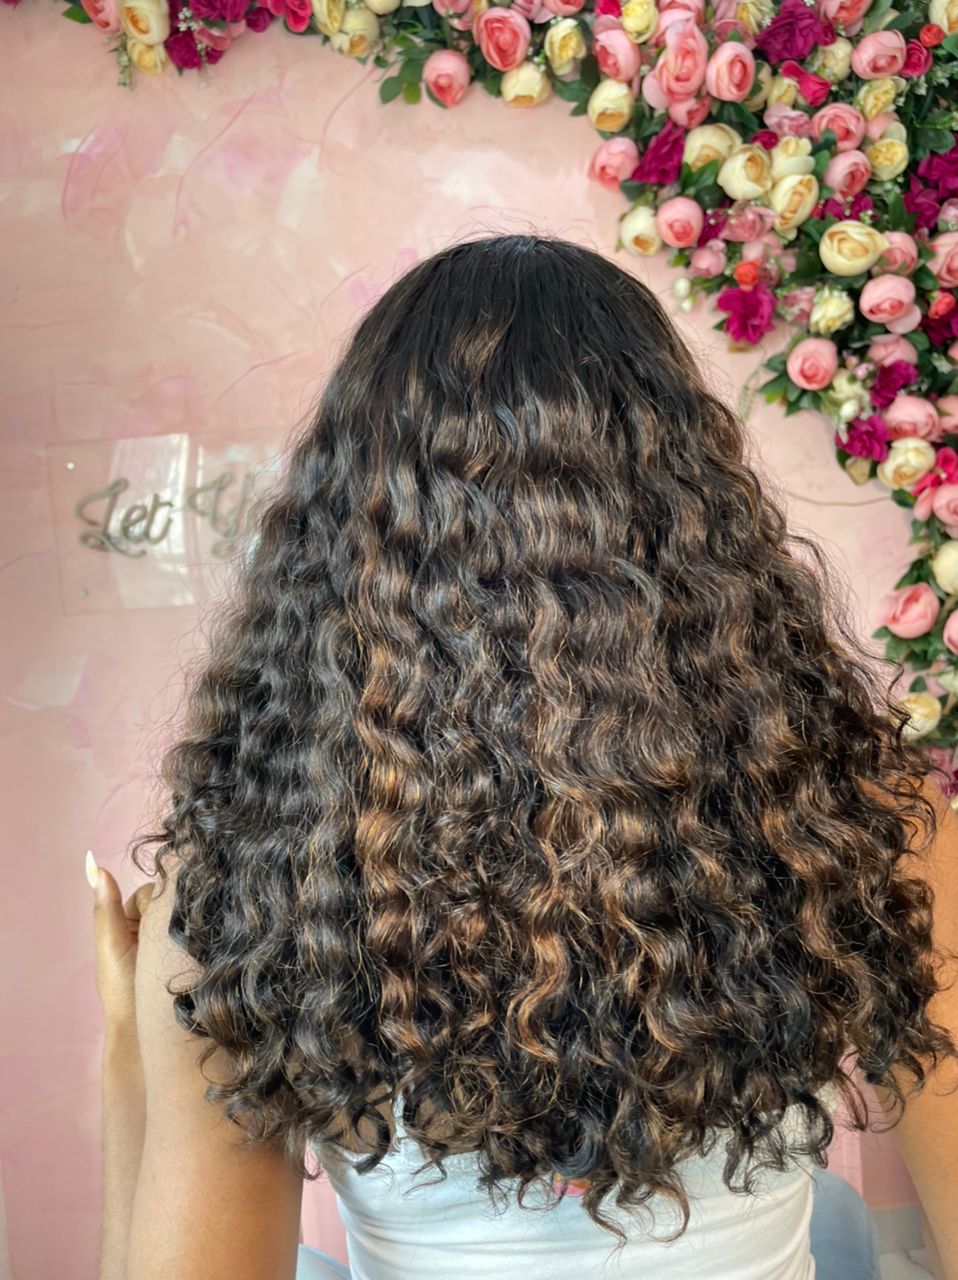 South american curls(colored)